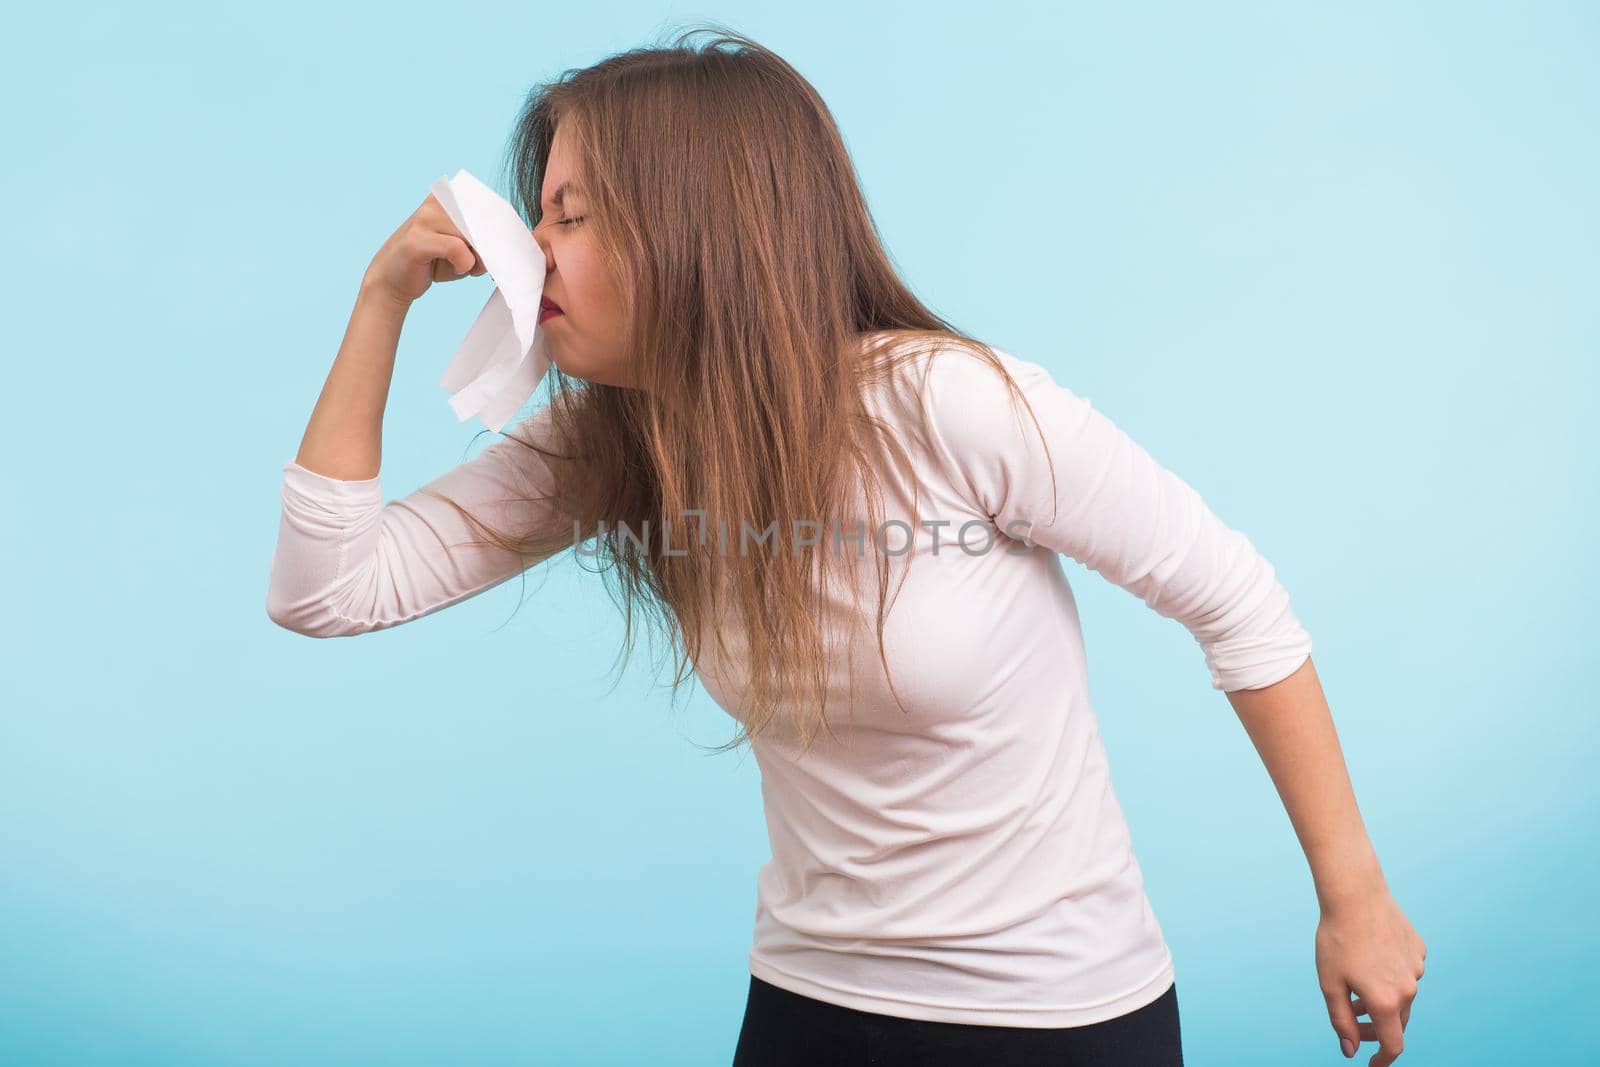 Young man has a runny nose on blue background.